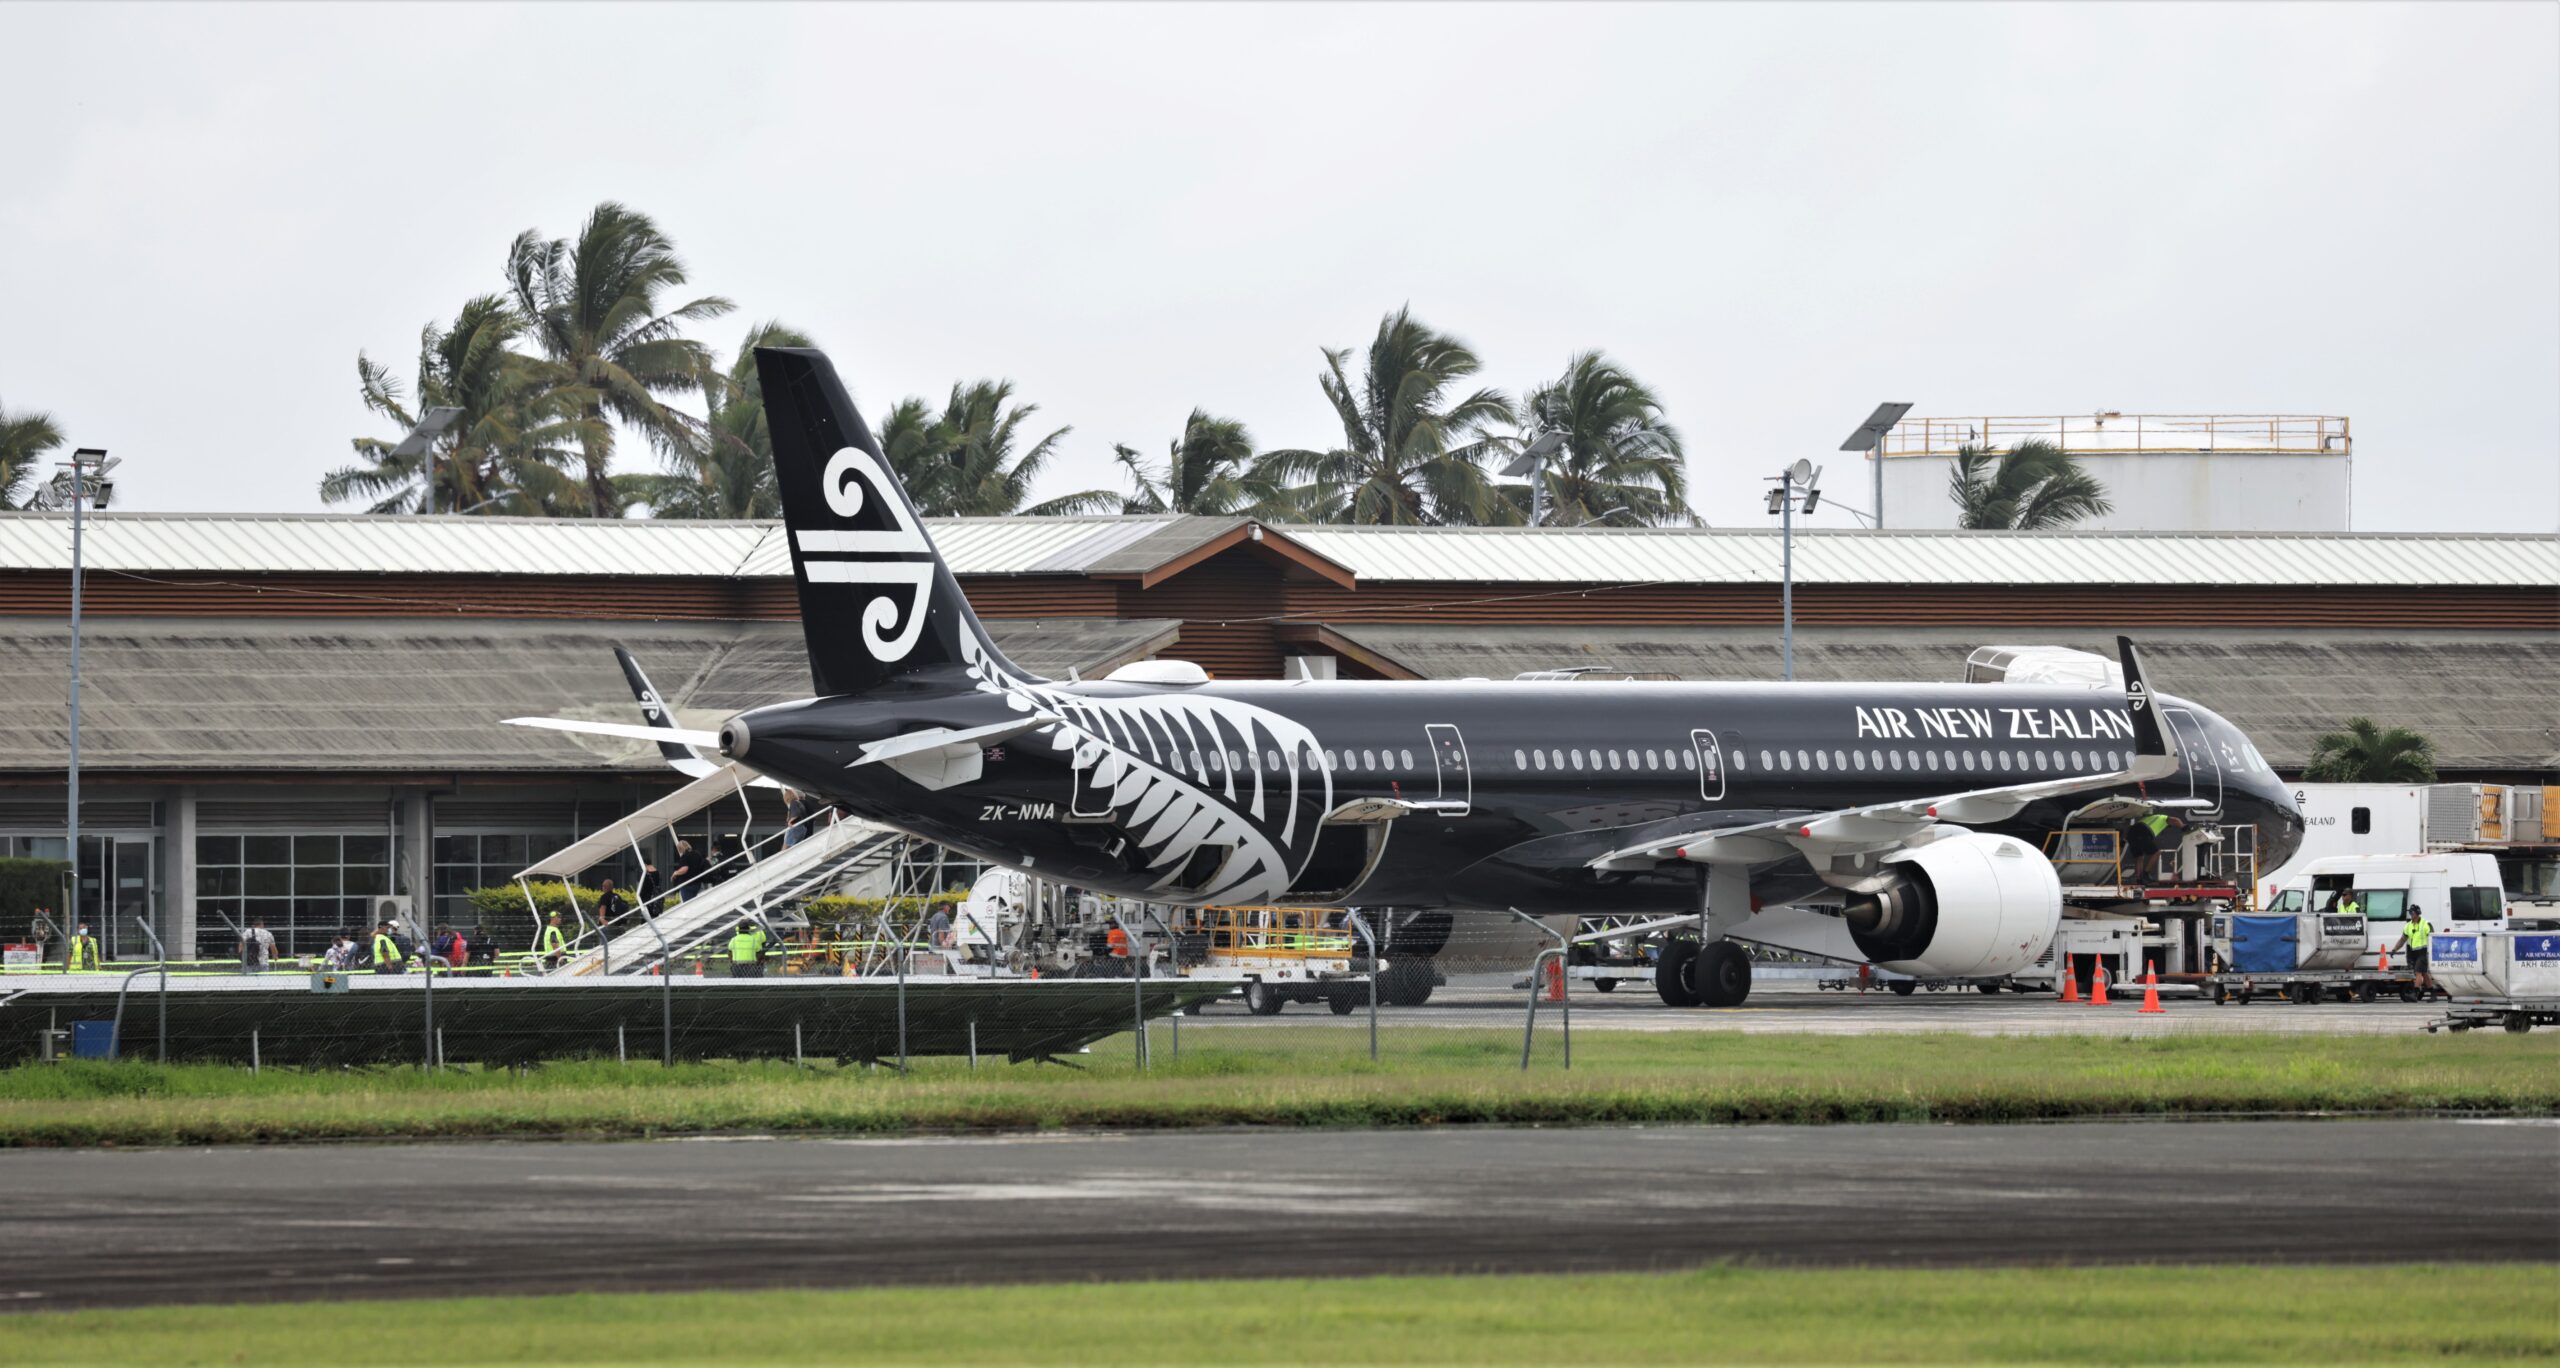 Government remains mum on Air New Zealand ‘legal’ bill